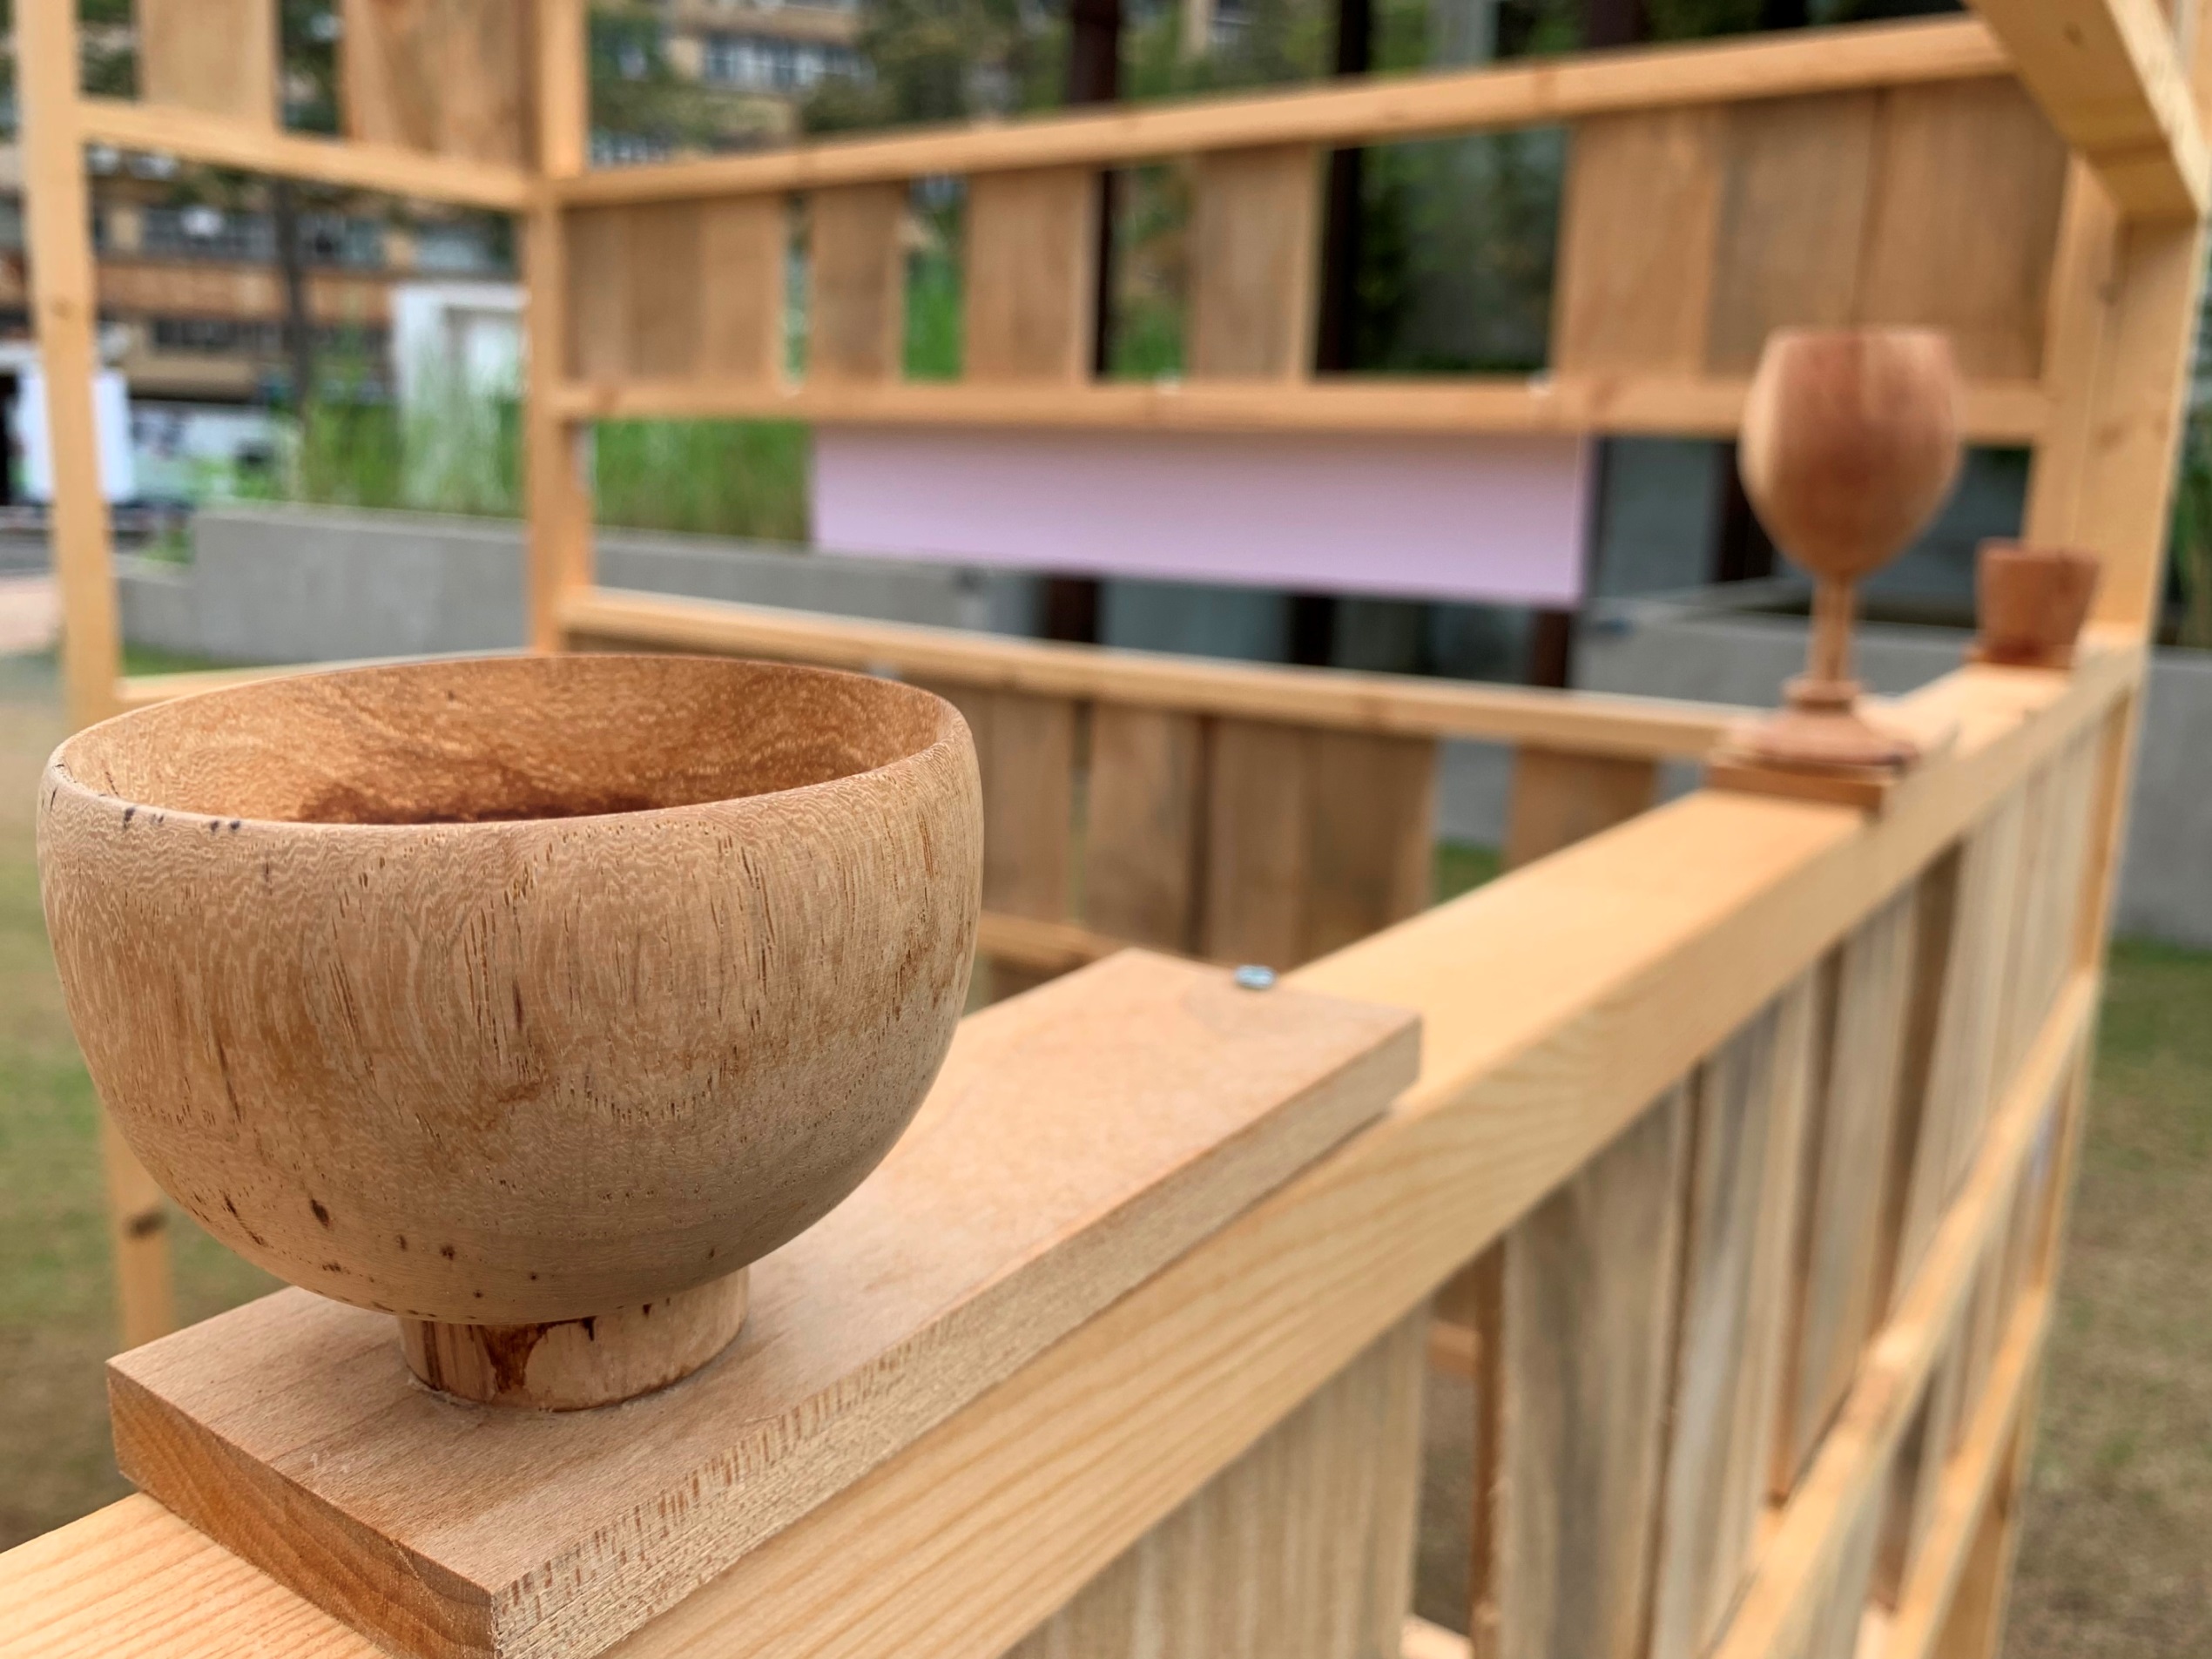 【Instrument】Featuring different wood grains, texture and colours of trees in Hong Kong, these instrument carry not only goods but also their stories. Through the creativity of the craftsman, endless possibilities of the local waste wood have been created. by: YUNG Wing-yan, Founder of Chingchun Warehouse and Coutou Woodworking Studio